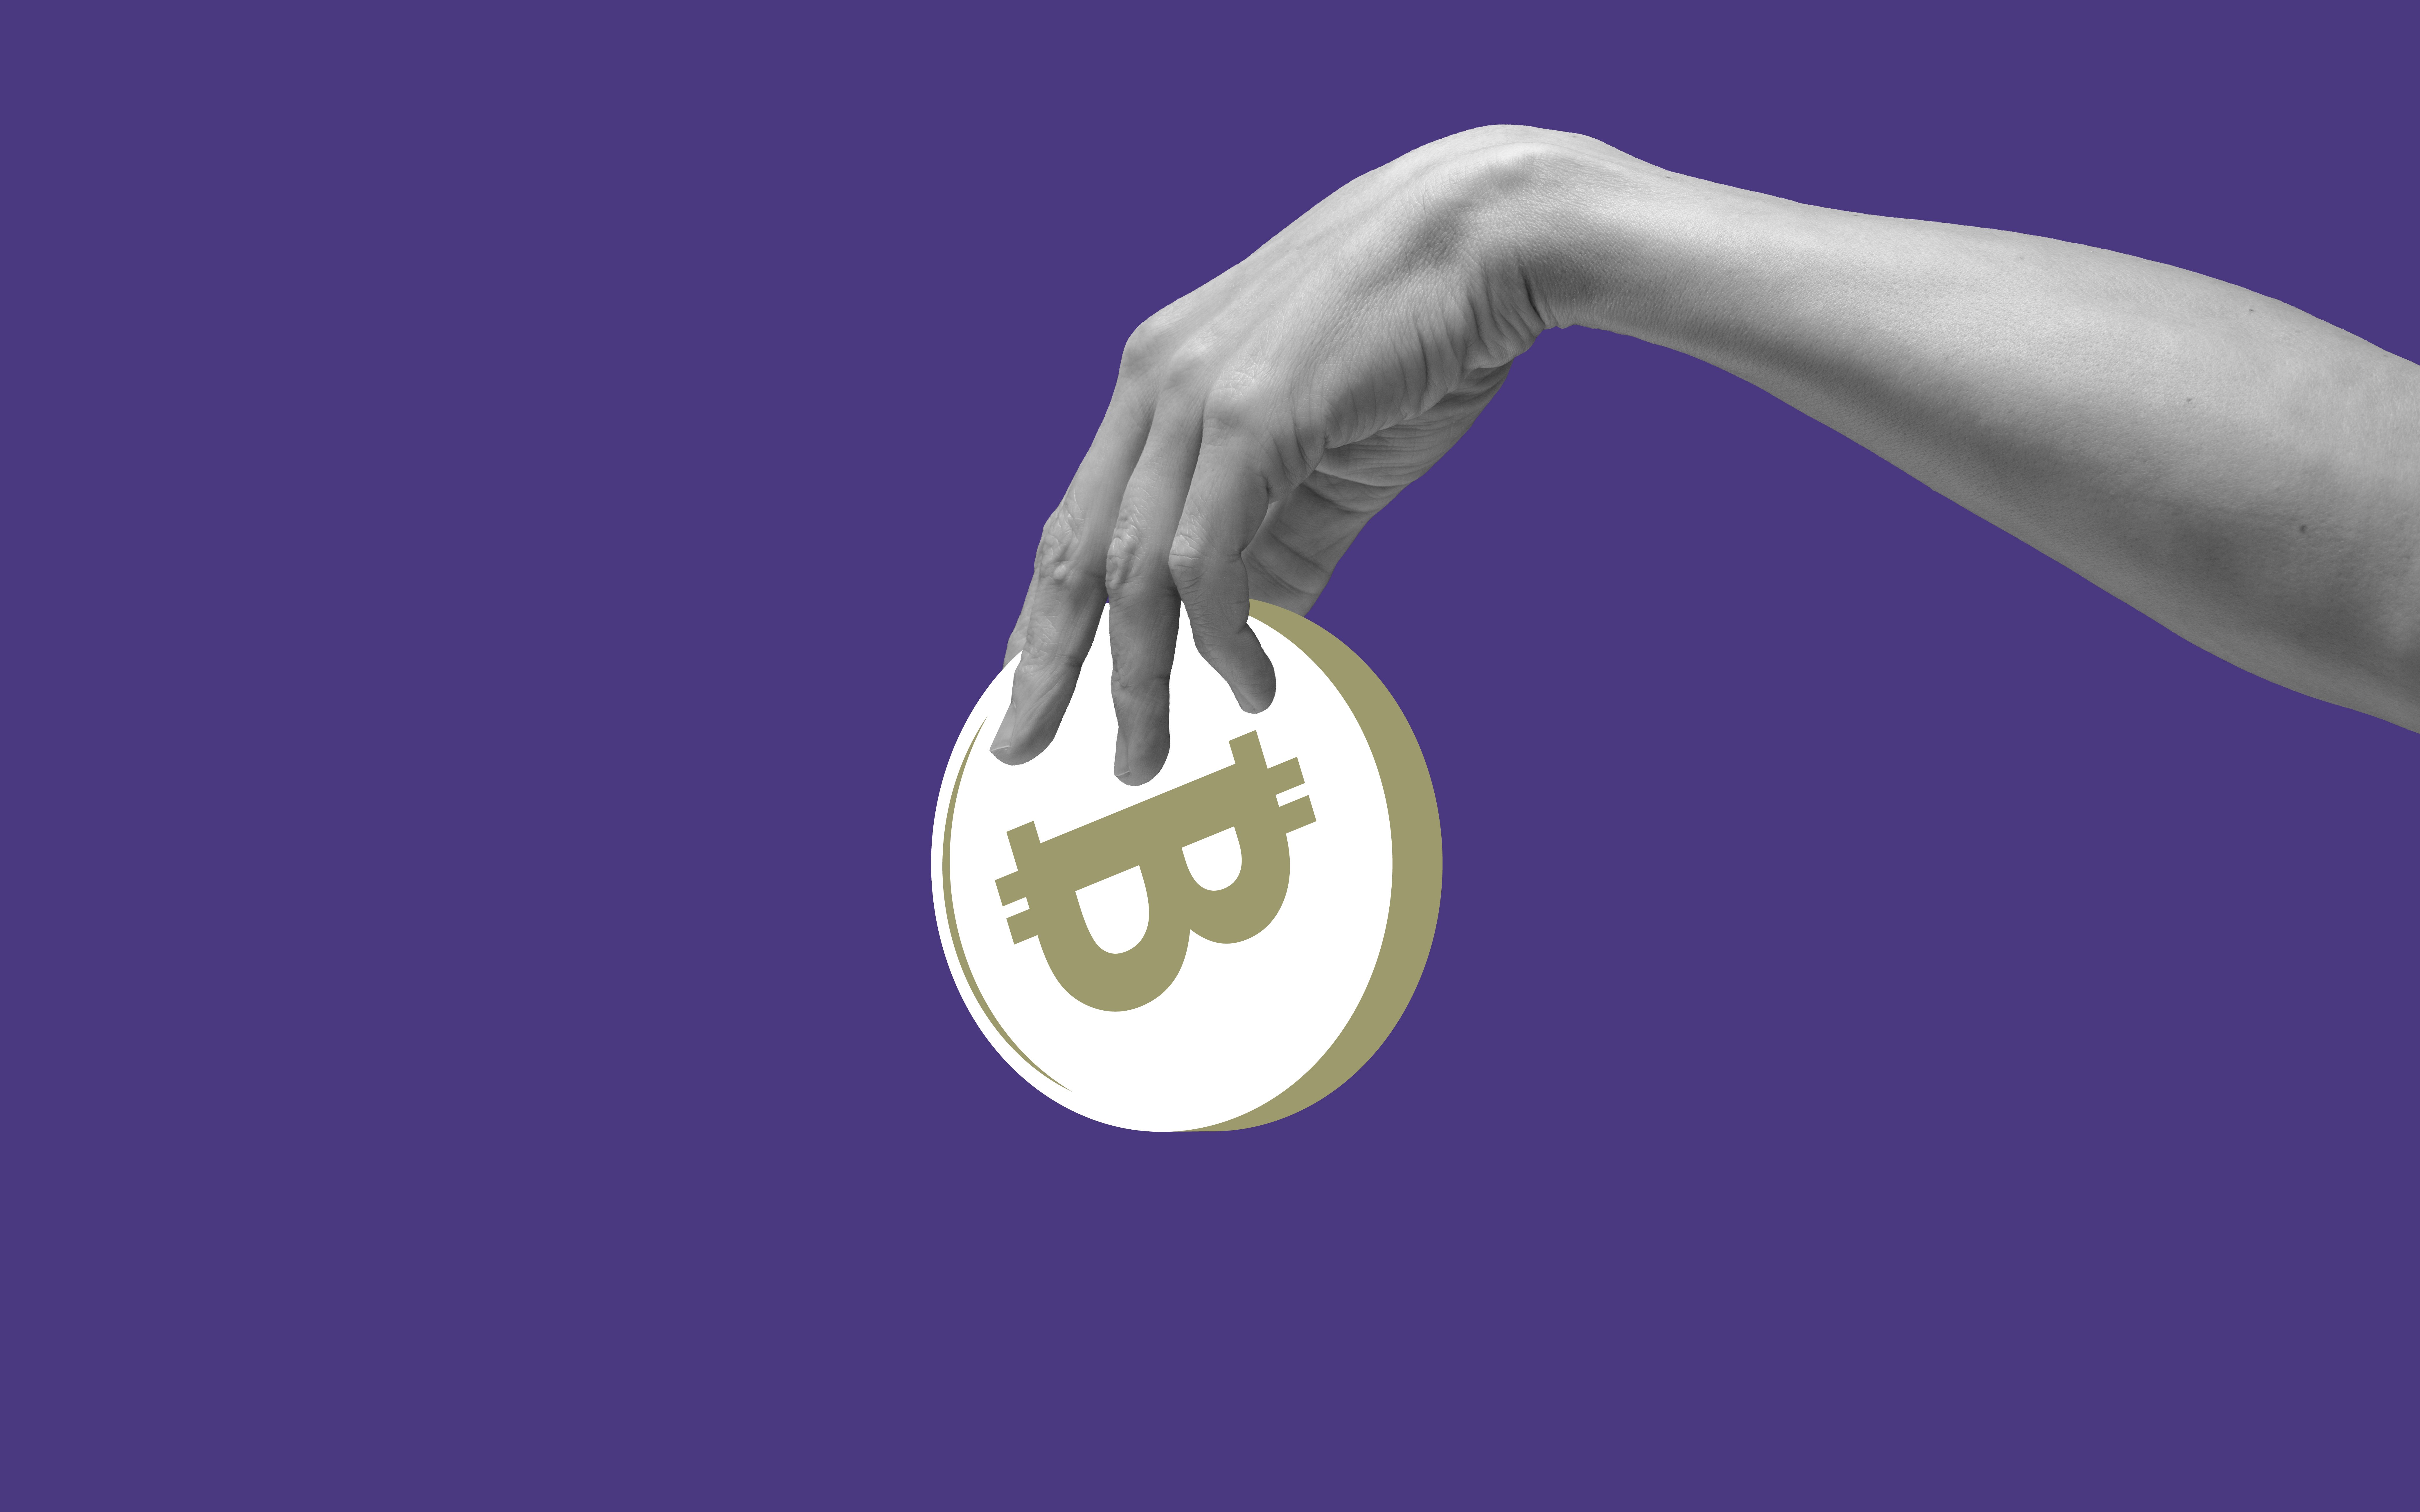 Hand holding abstract bitcoin against purple background.